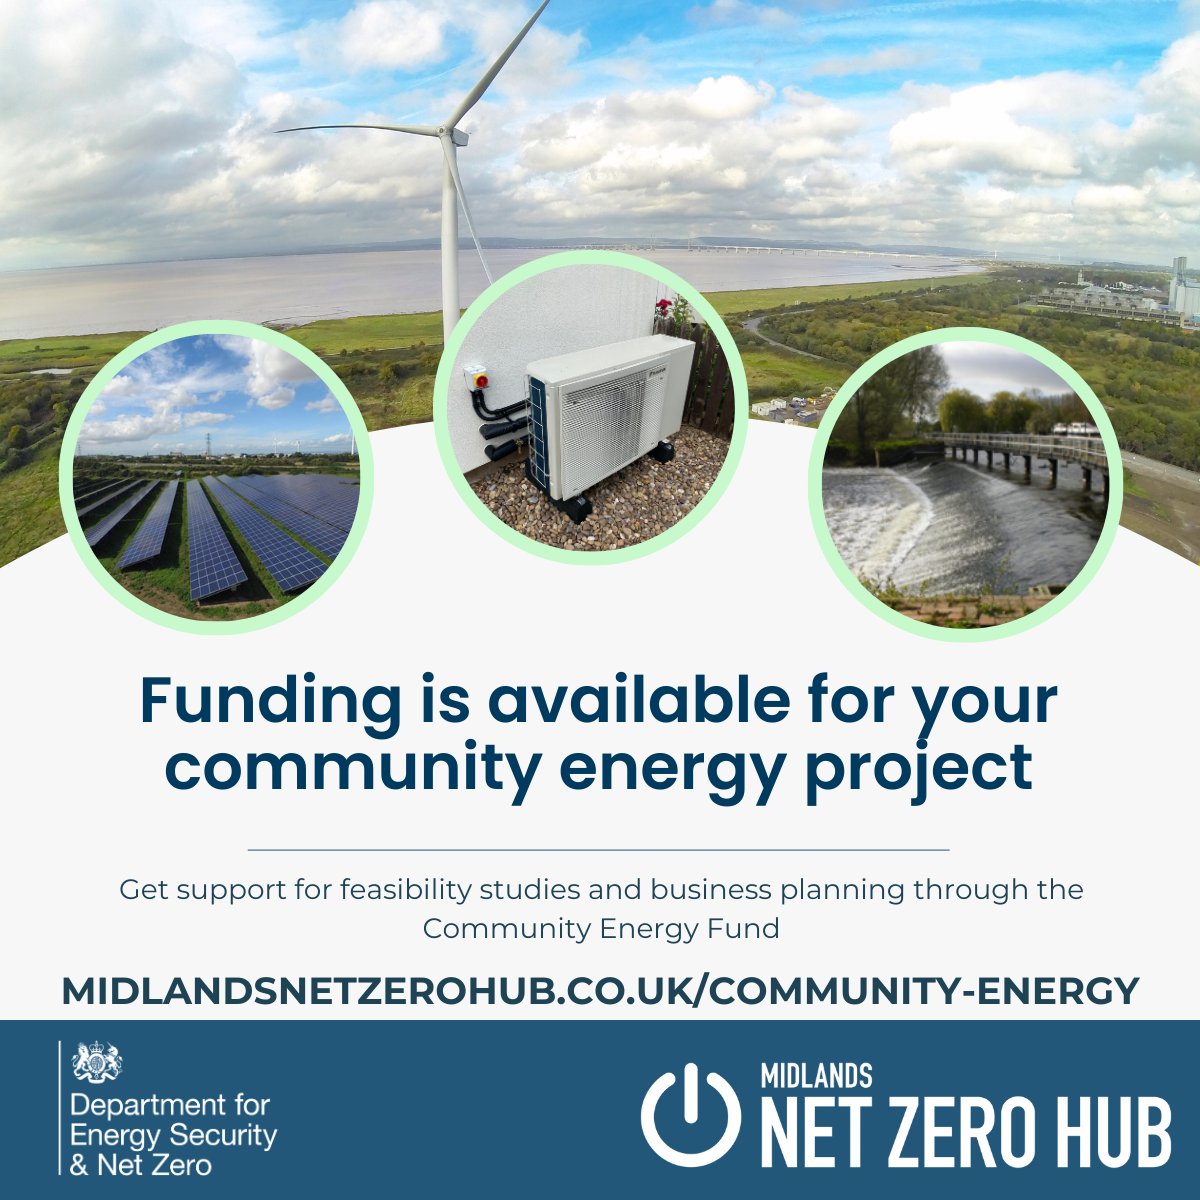 Broxtowe community groups – you could get up to £140,000 for your community energy project!

If you’re interested, there are opportunities with the Community Energy Fund.

Small changes, big difference:
midlandsnetzerohub.co.uk/community-ener…

#CommunityEnergyFund #GreenFutures #ClimateChange